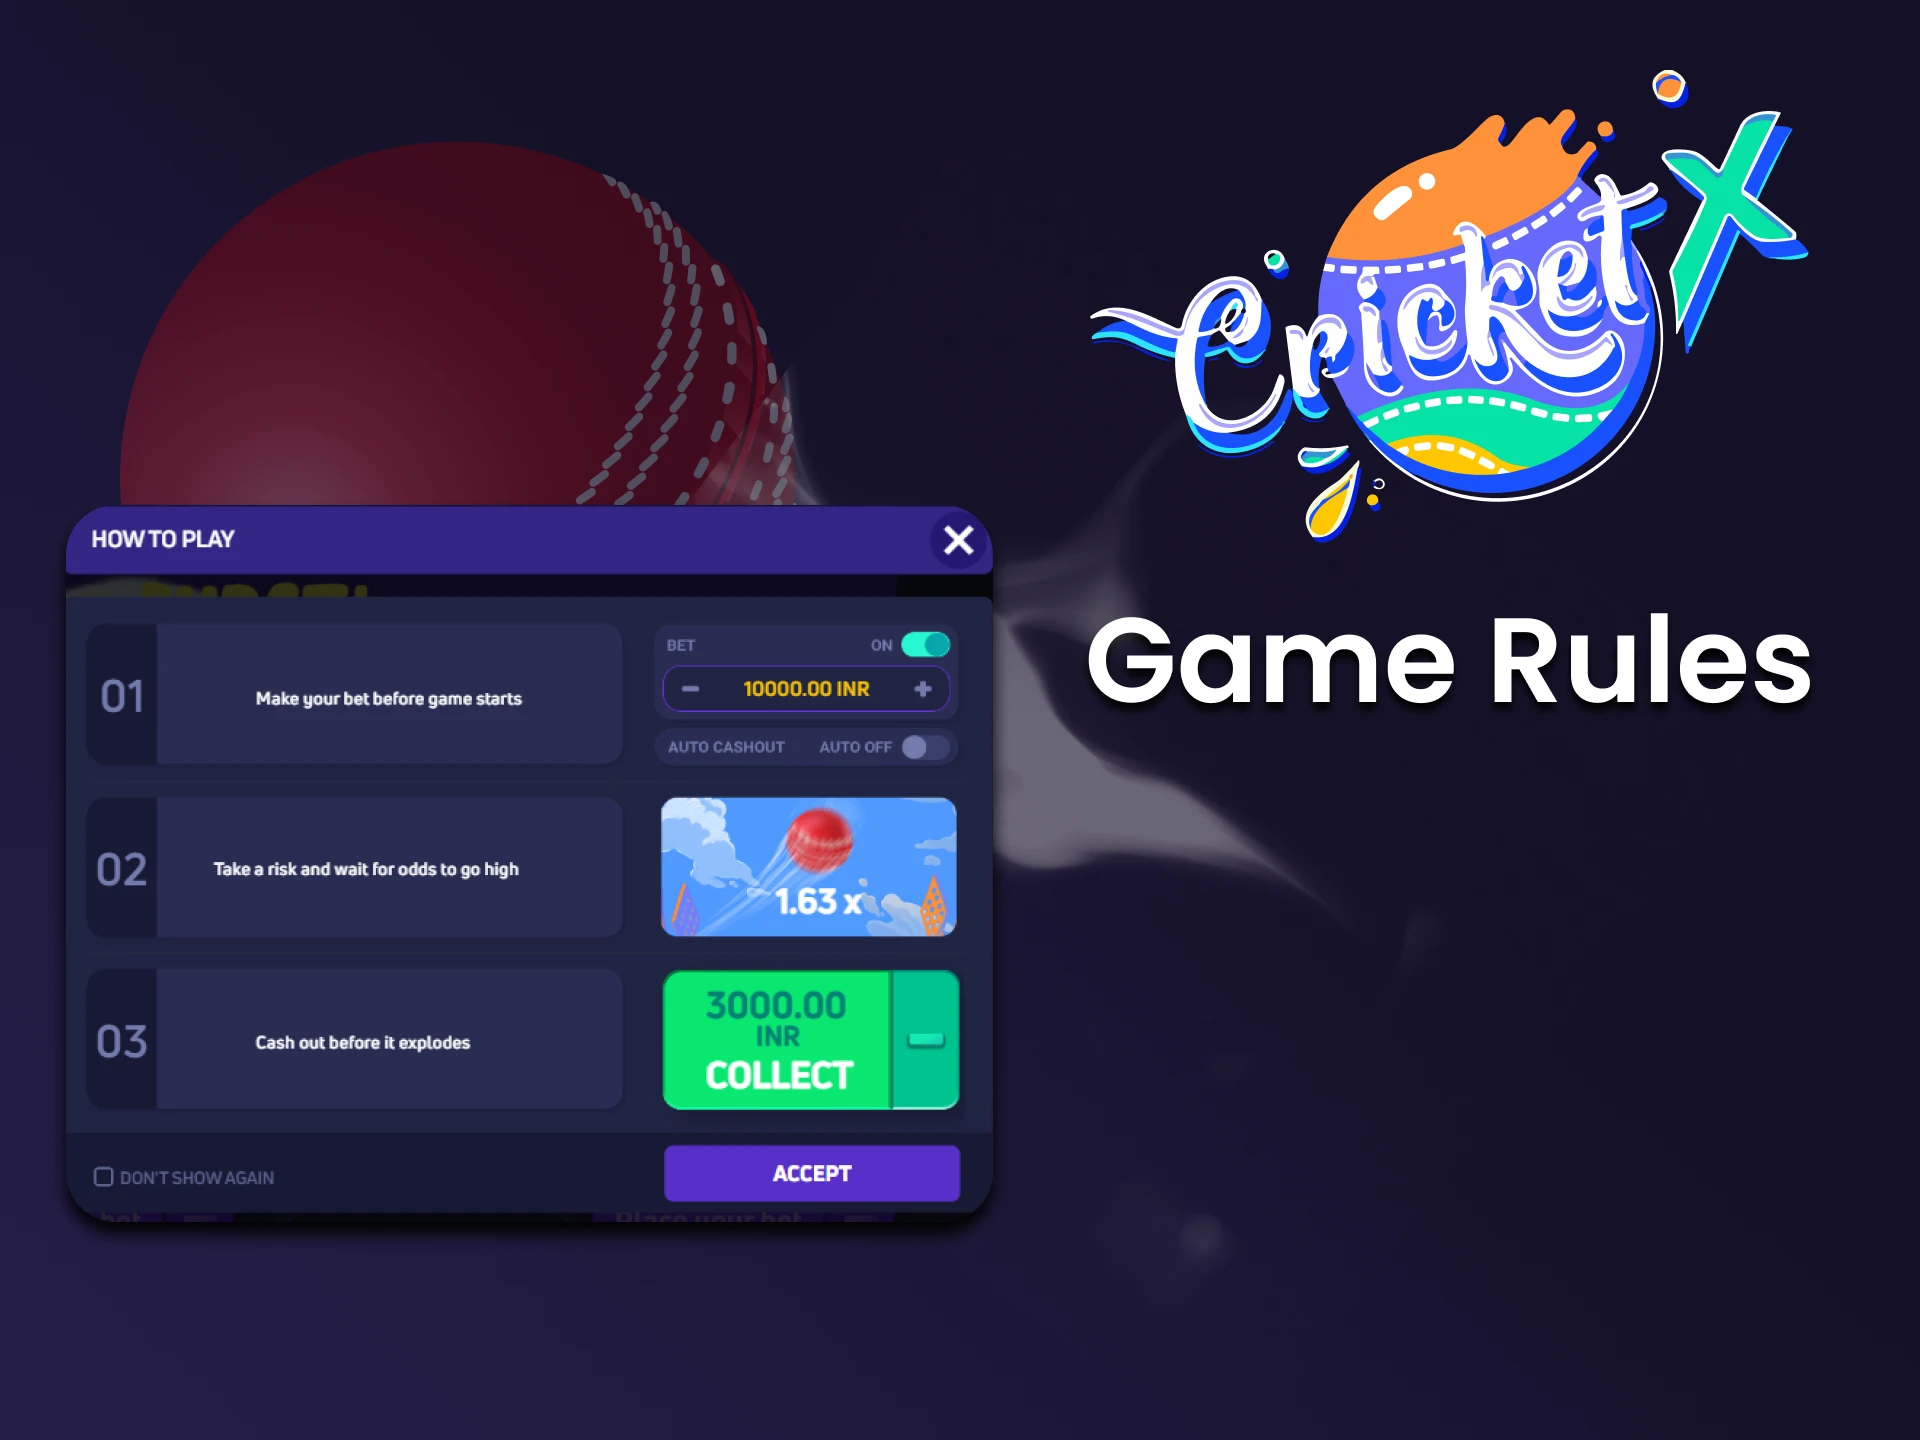 We will tell you about the rules of the Cricket X game.